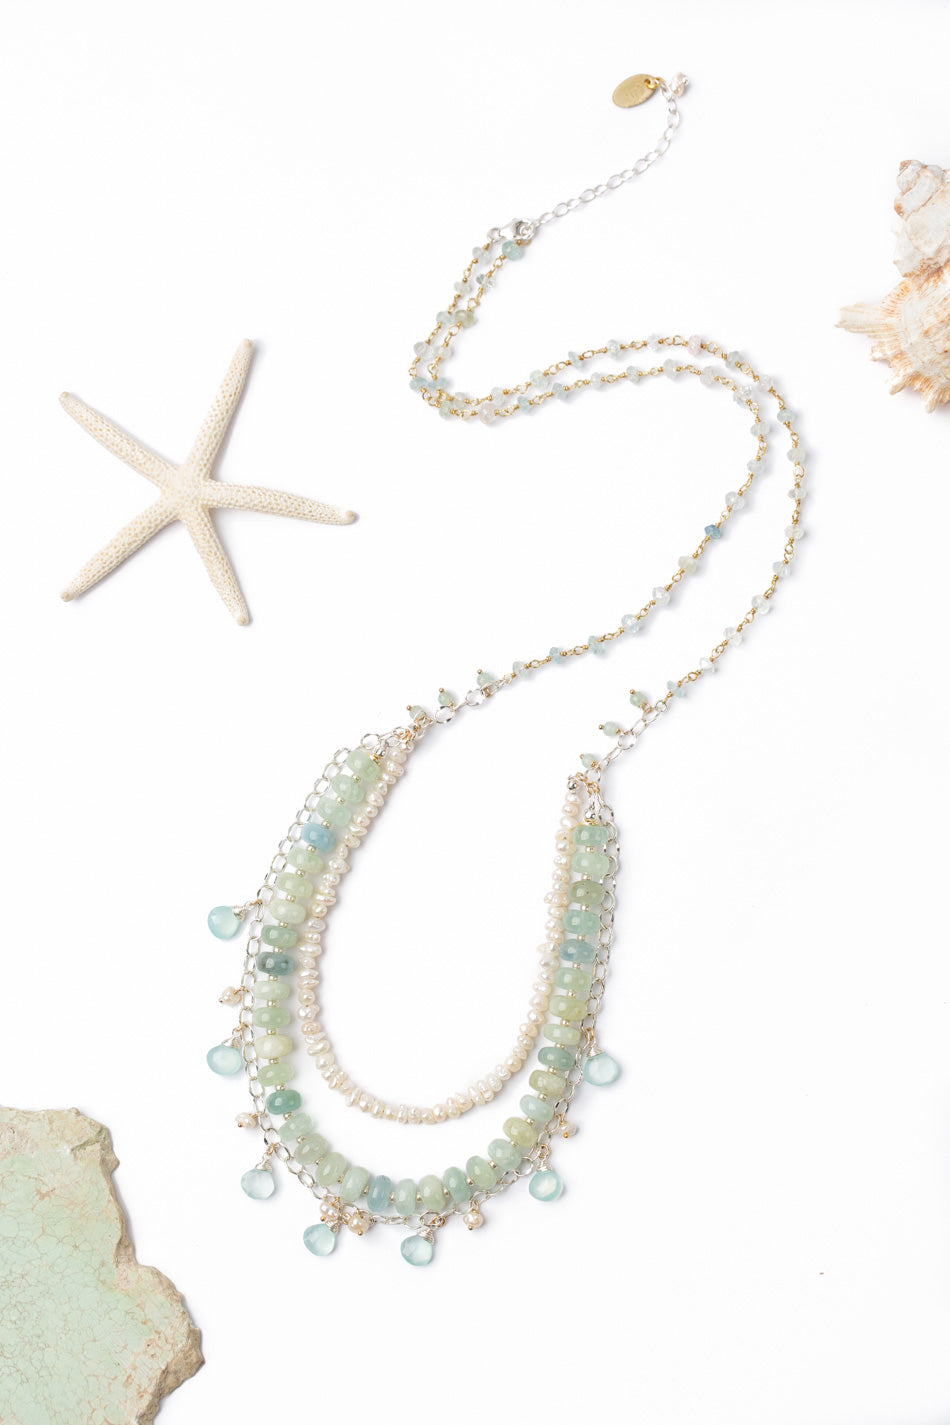 Serenity 26.5-28.5" Aquamarine, Freshwater Pearl, Faceted Blue Chalcedony Multistrand Necklace